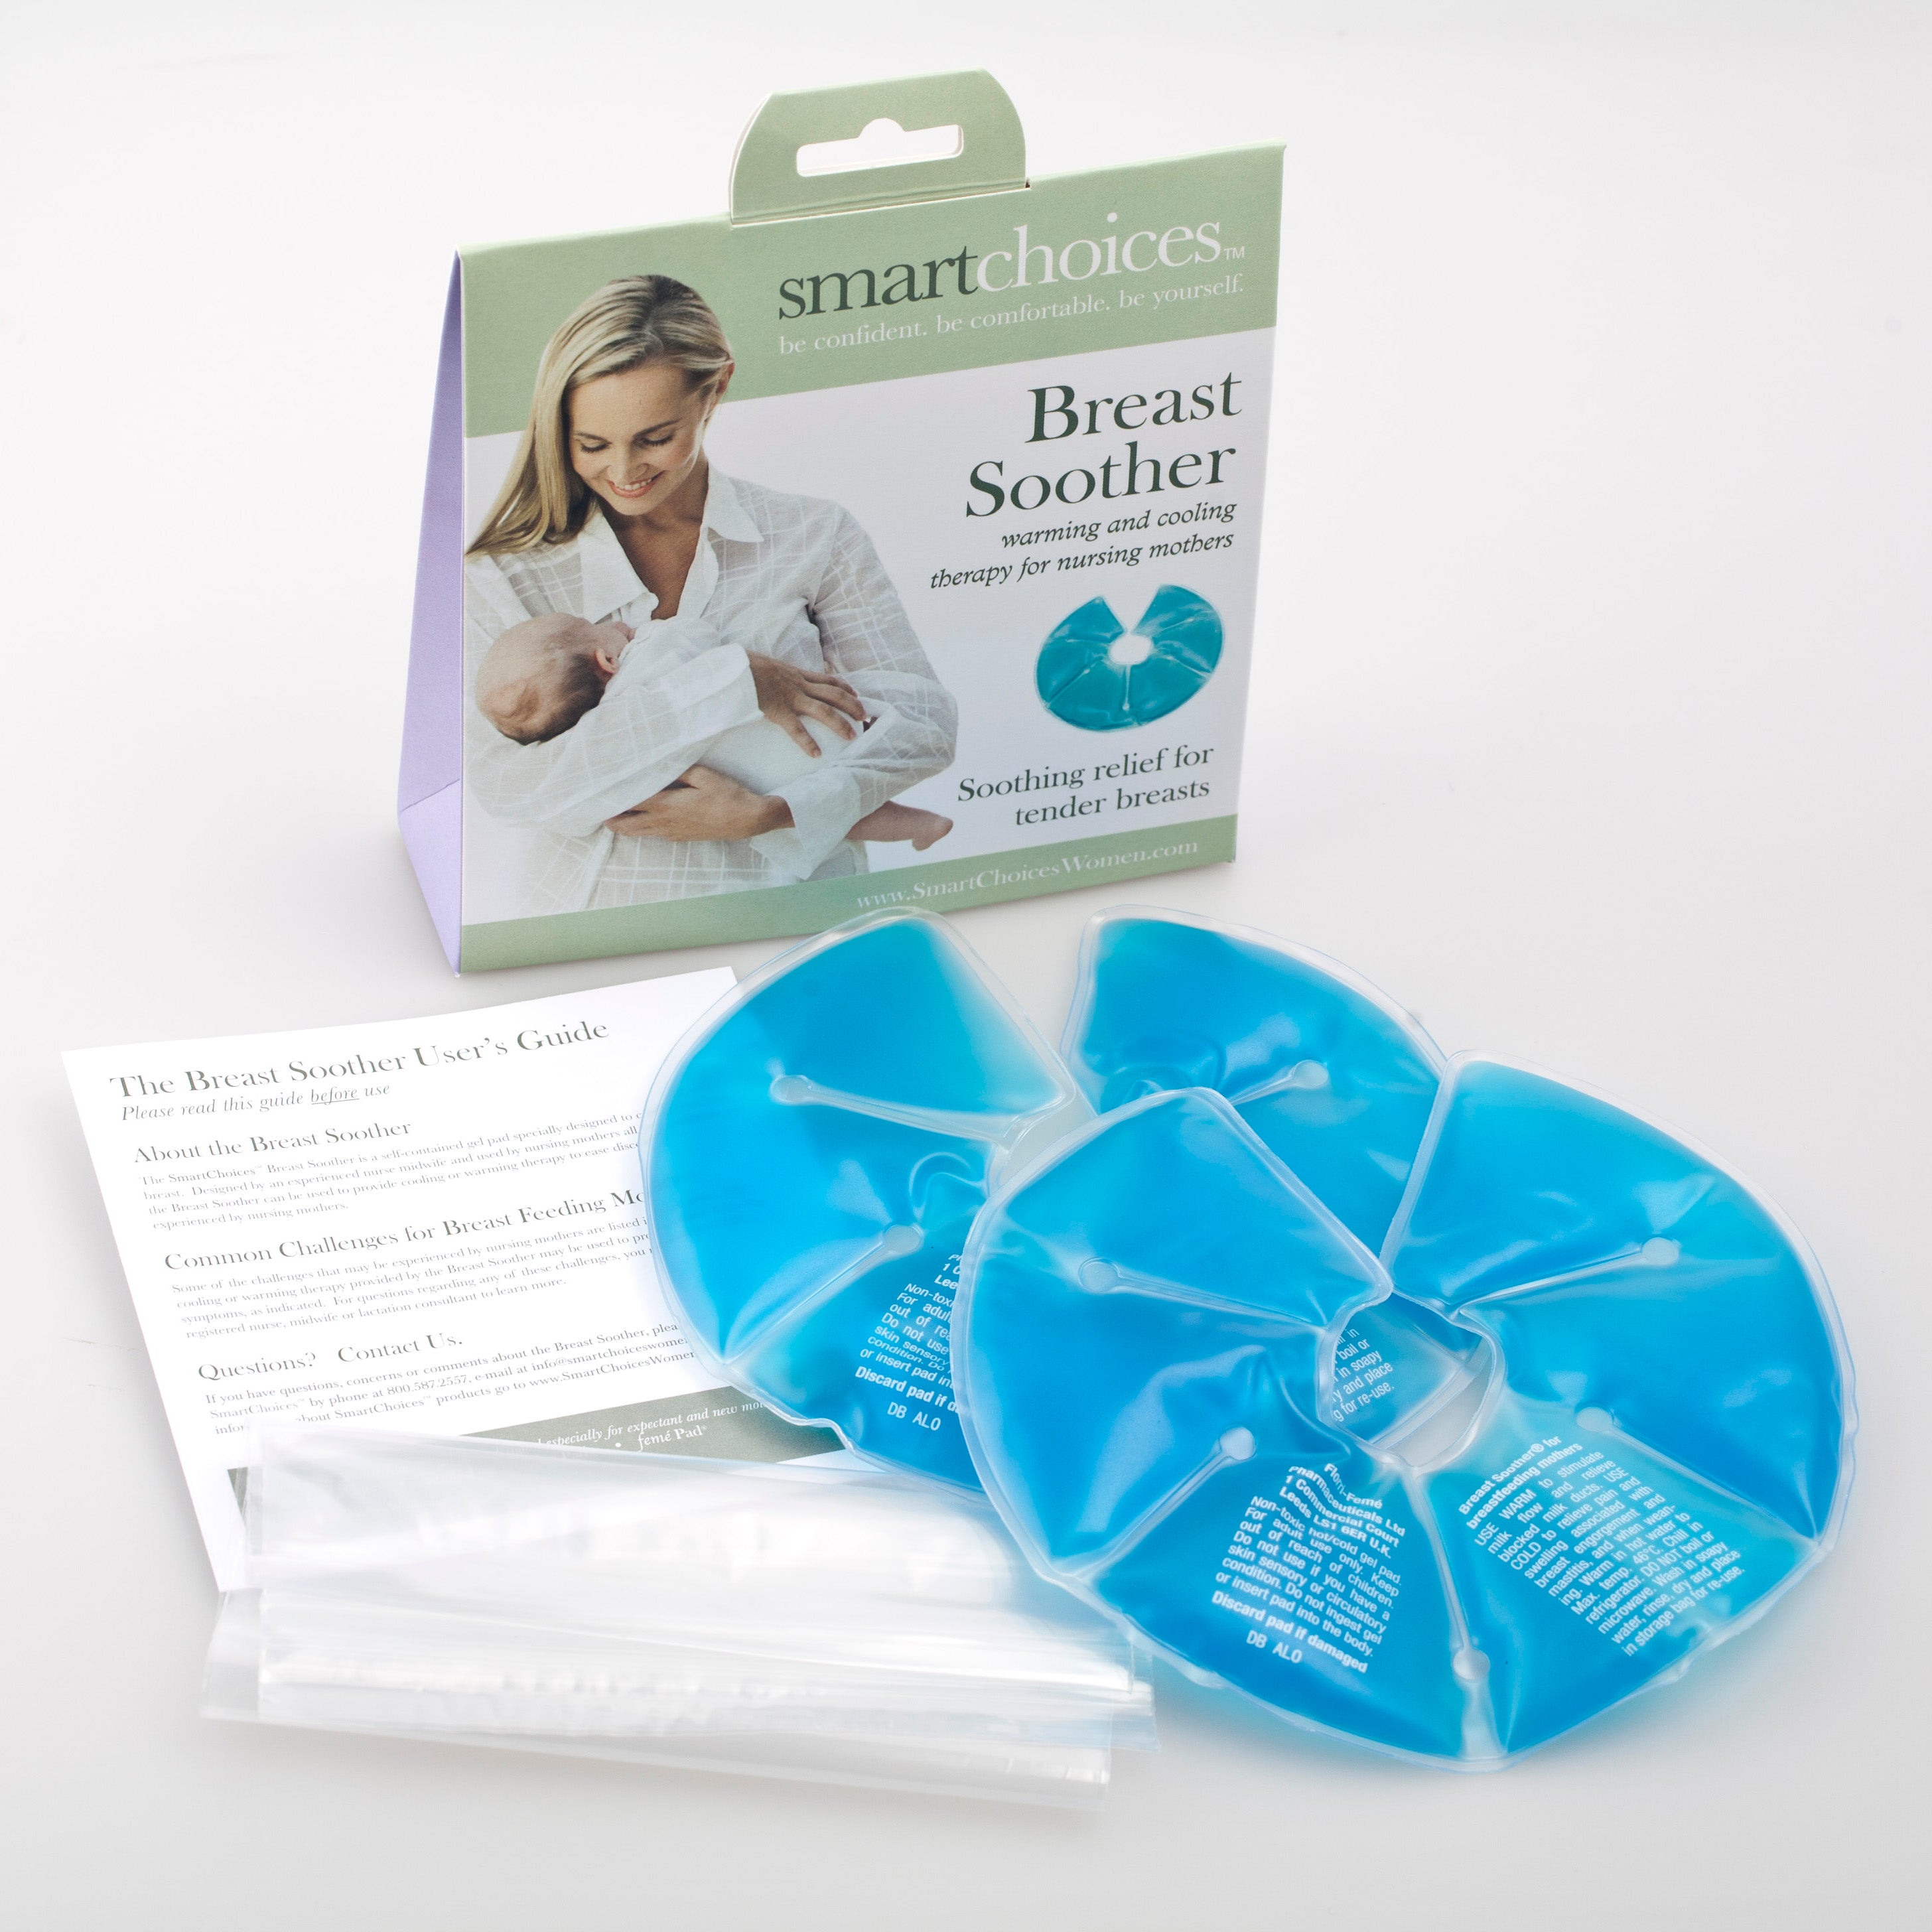 Gel Nursing Pads Hot & Cold Breast Therapy Relieve Mastitis